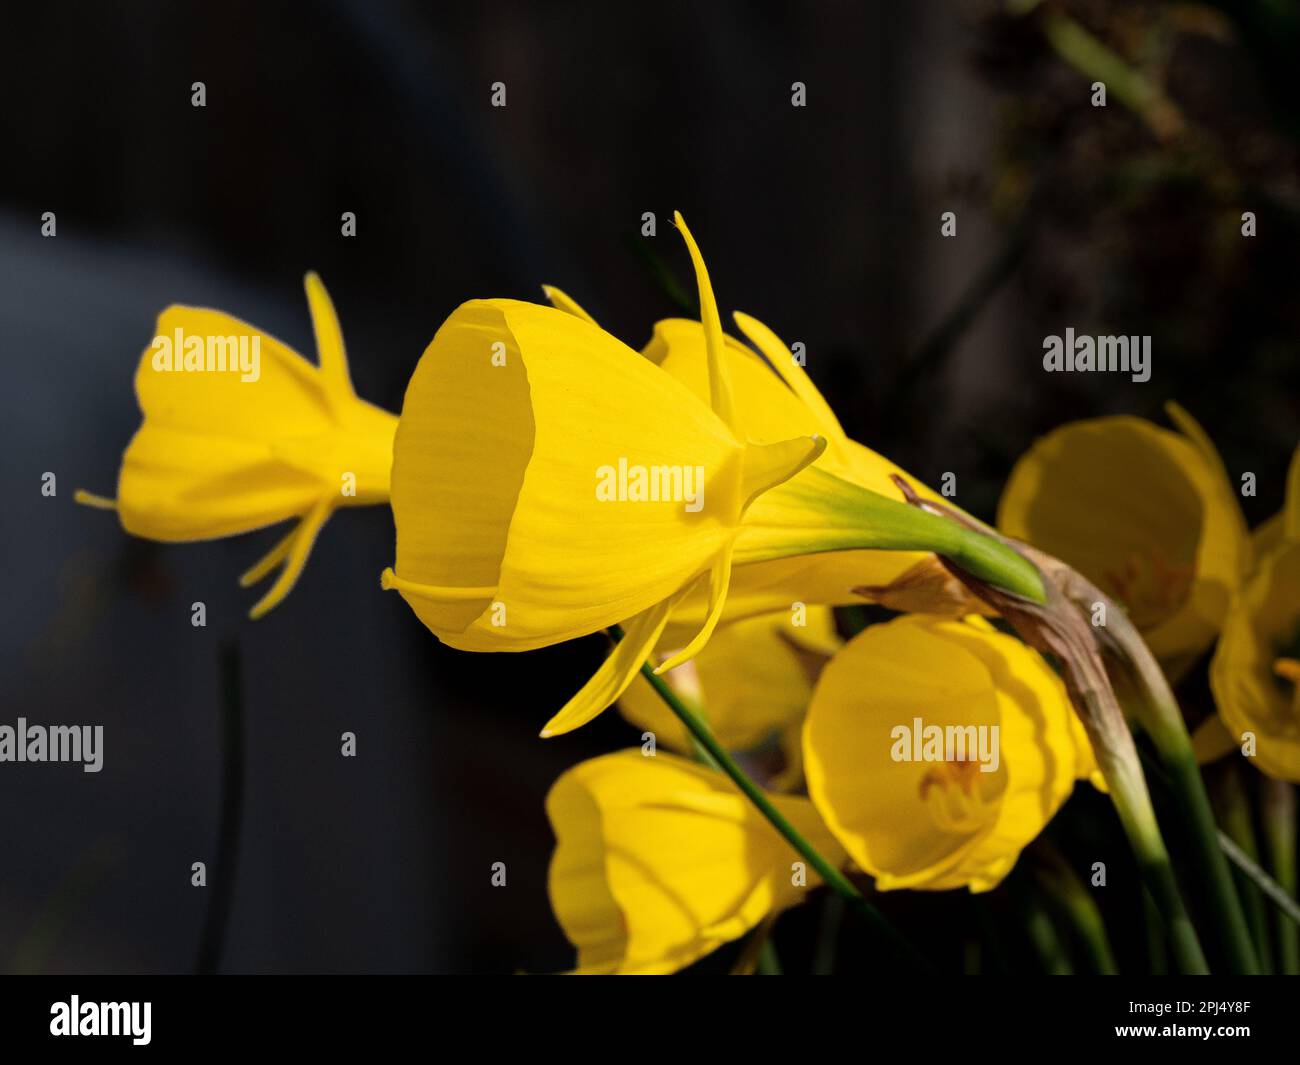 The deep yellow trumpets of the miniature daffodil Narcissus obesus Stock Photo